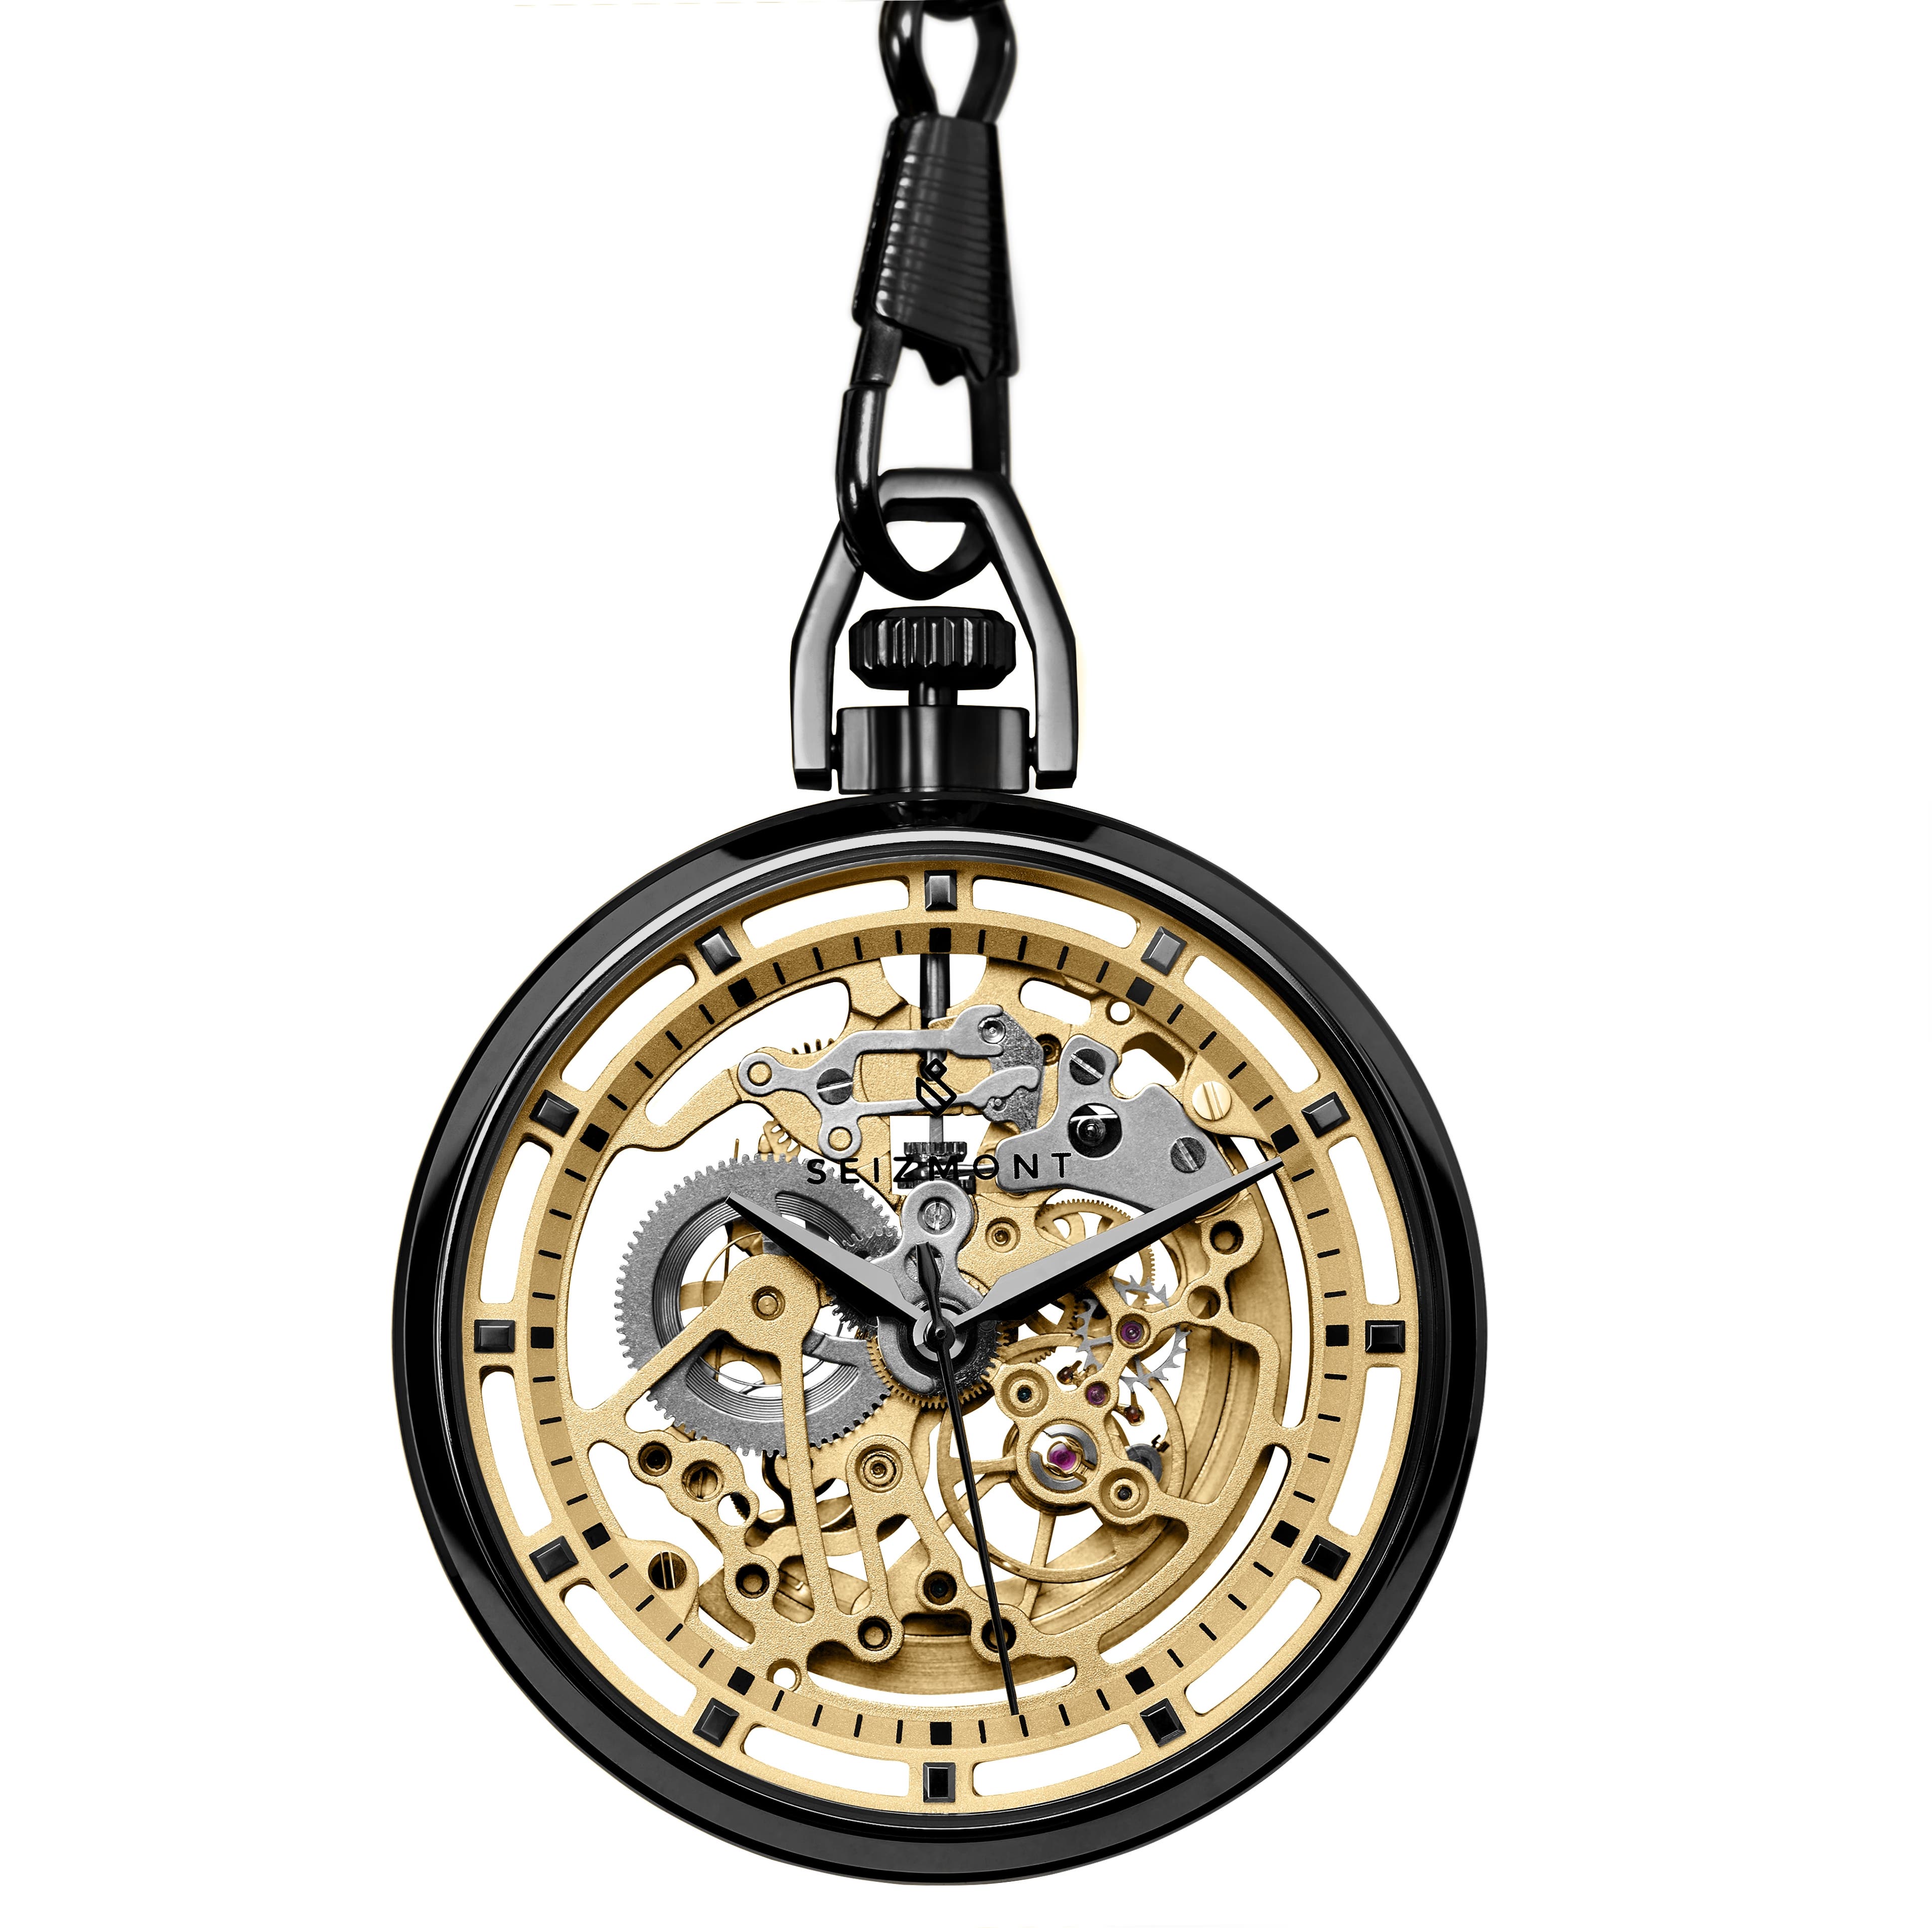 Agito | Black Stainless Steel Pocket Watch With Gold-Tone Movement